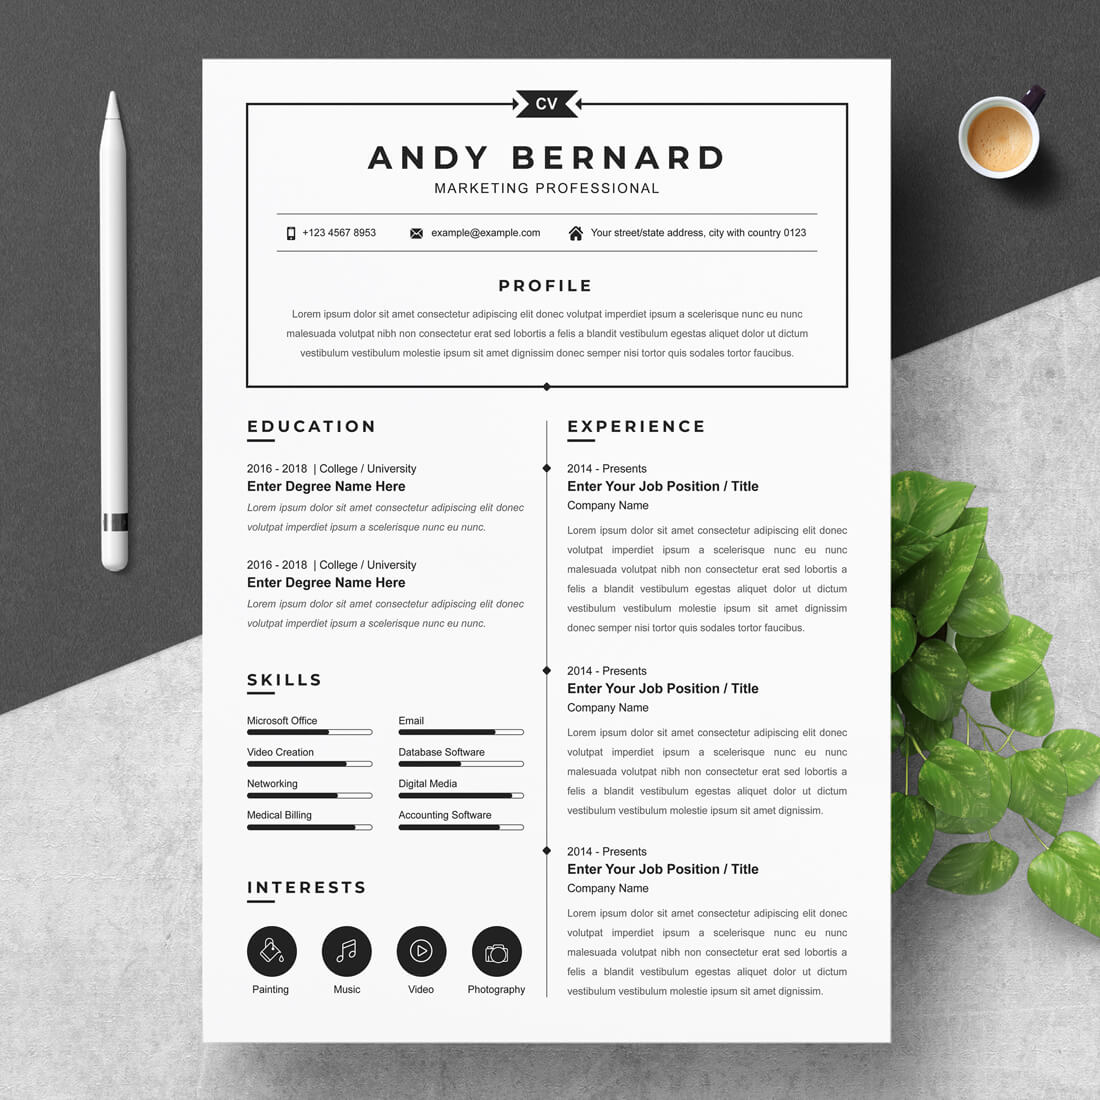 Marketing Professional Resume Template main cover.